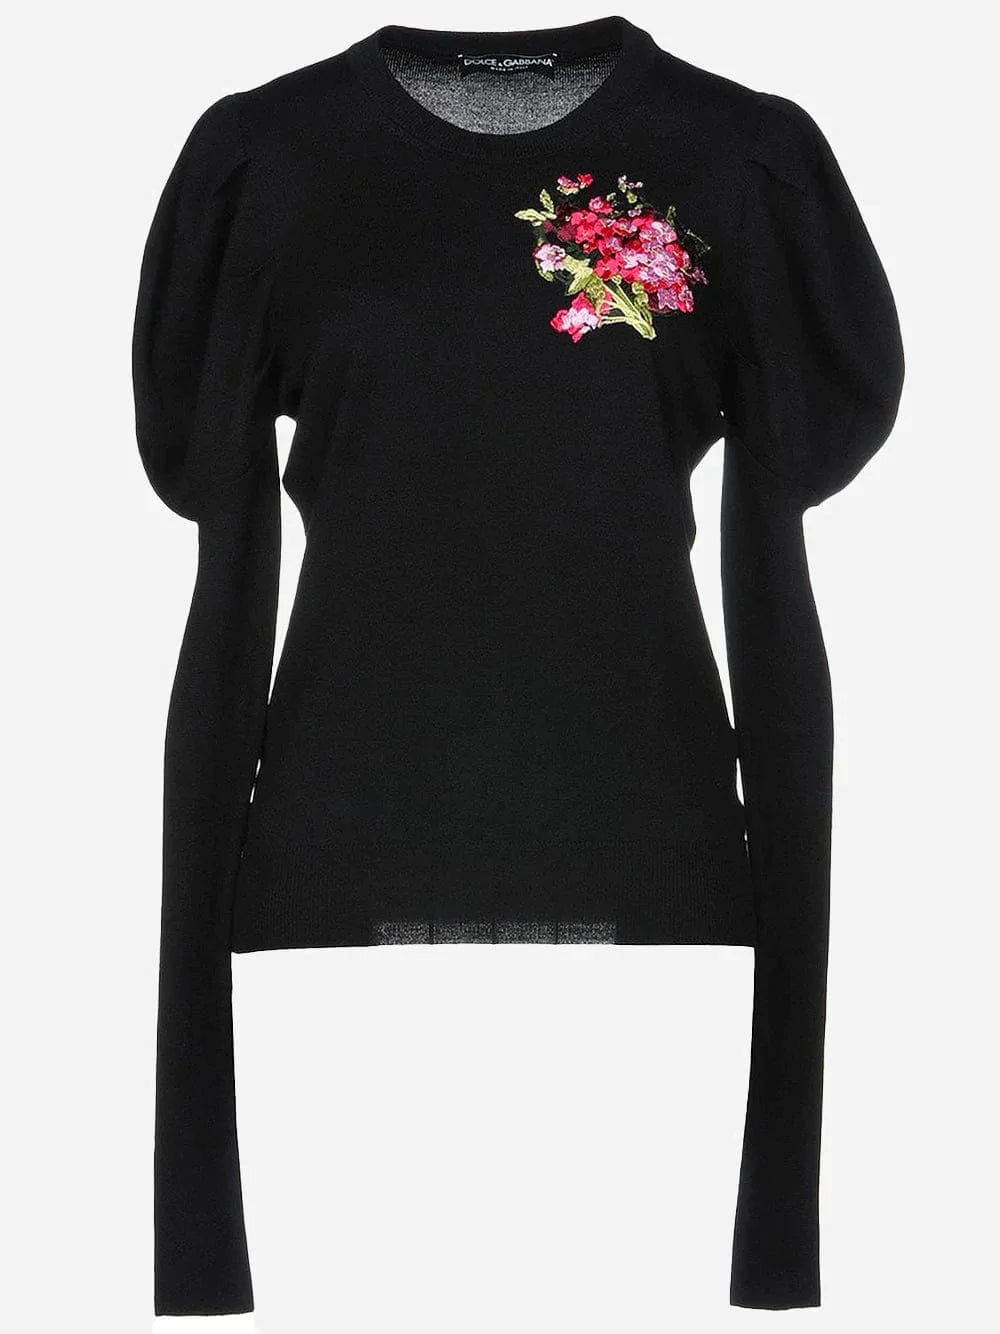 Dolce & Gabbana Floral-Embroidery Crewneck Sweater